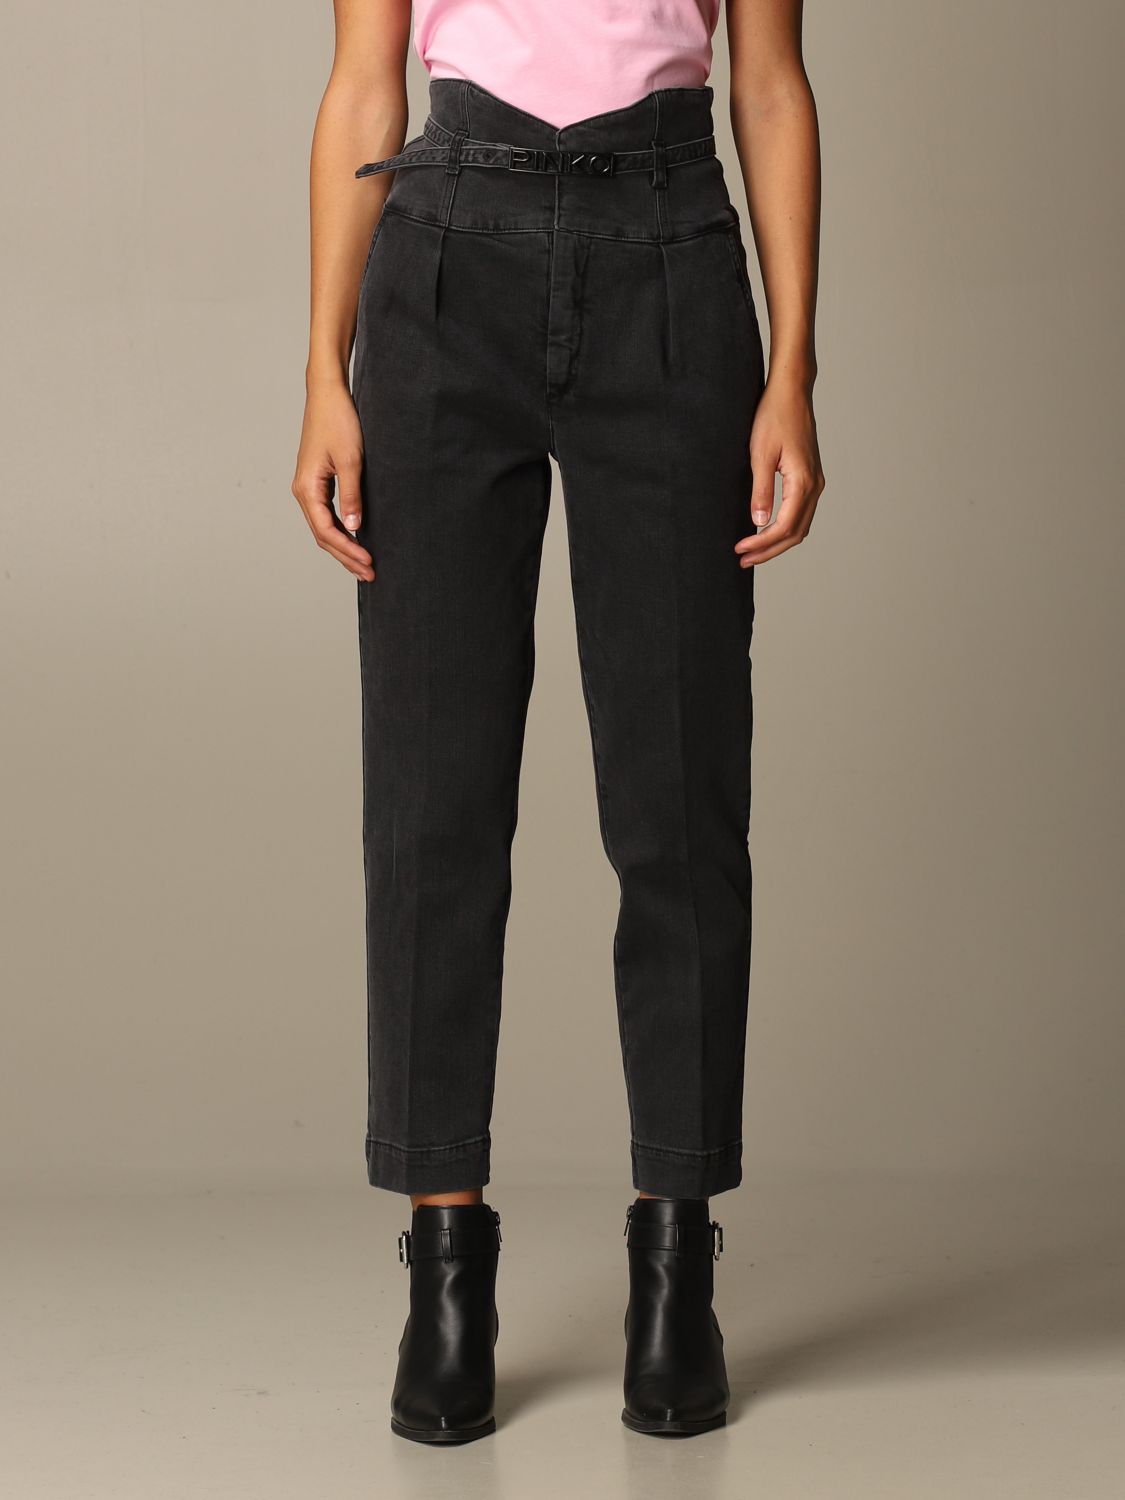 PINKO: Ariel 4 high-waisted jeans with belt - Black | Jeans Pinko ...